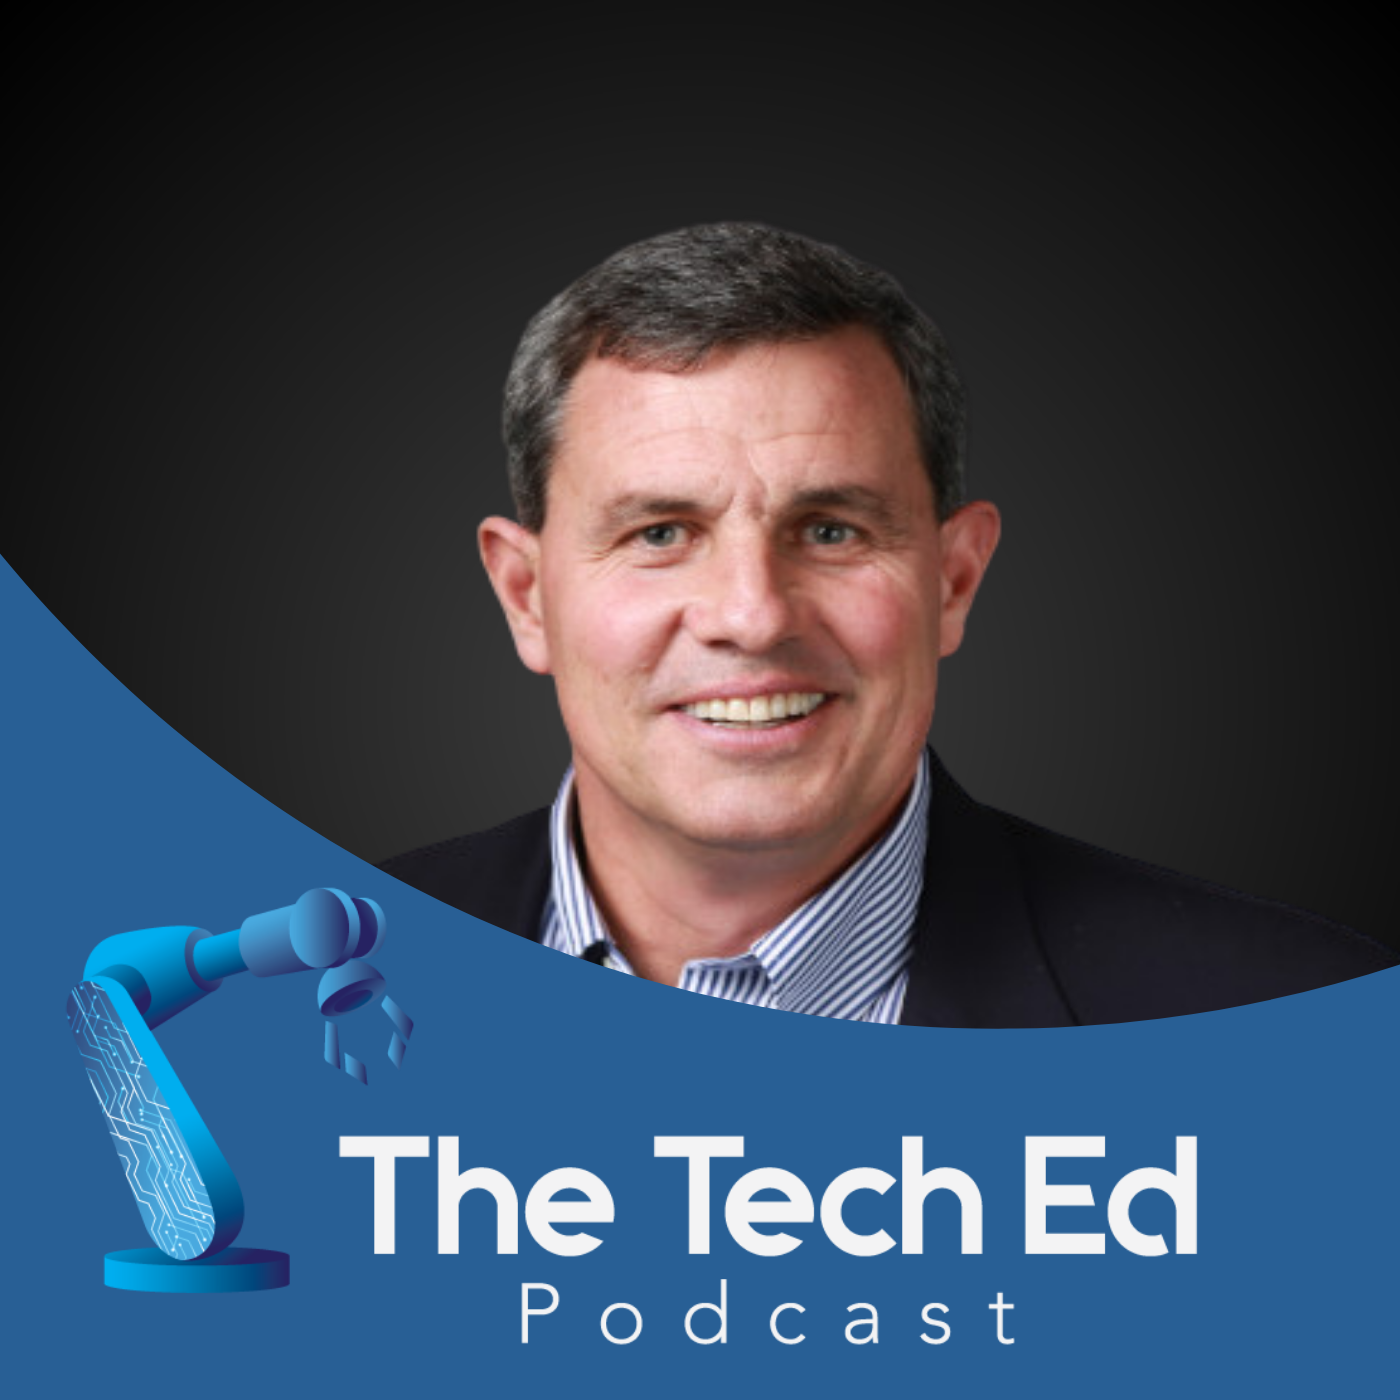 Bill Berrien on The TechEd Podcast